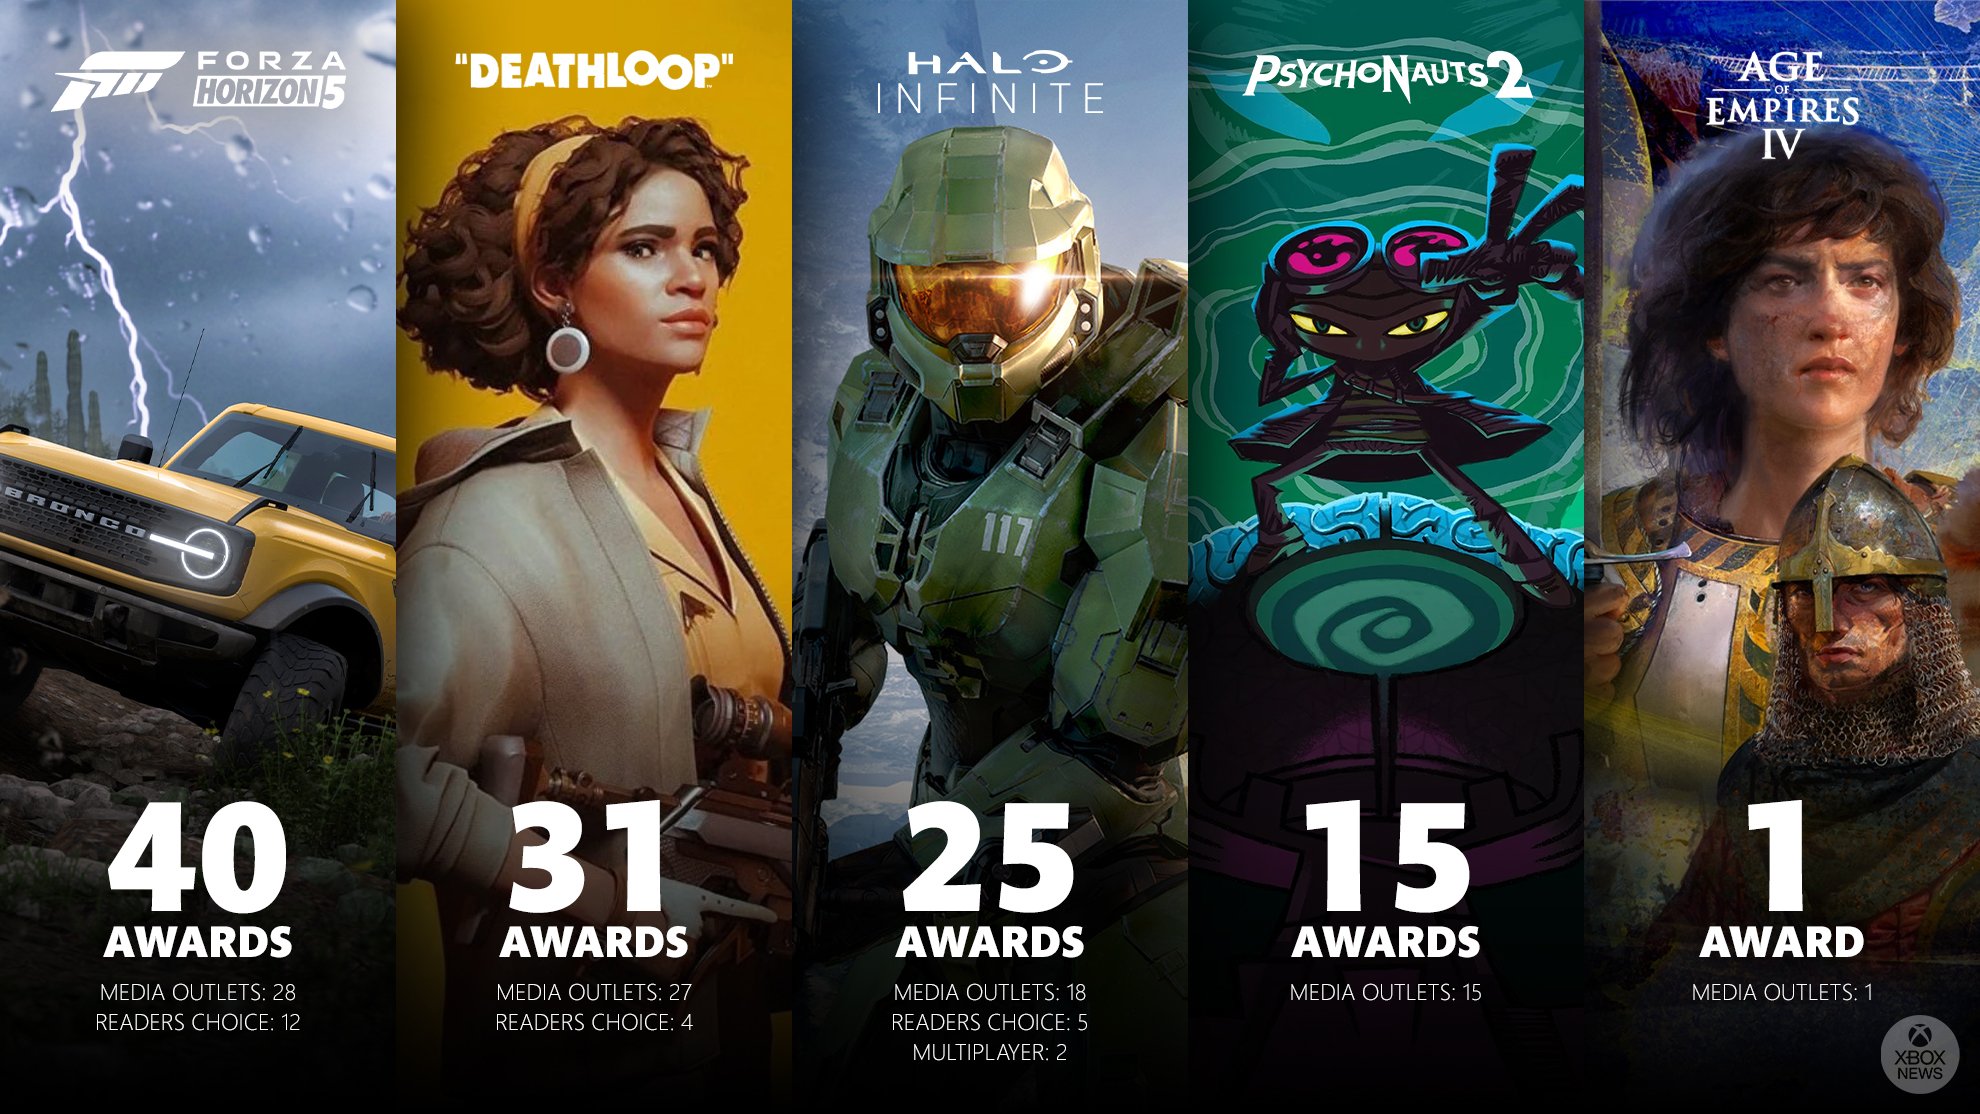 Ten New Titles, Critical Acclaim, and Exceptional Engagement Mark a Record  Year for Xbox Game Studios - Xbox Wire